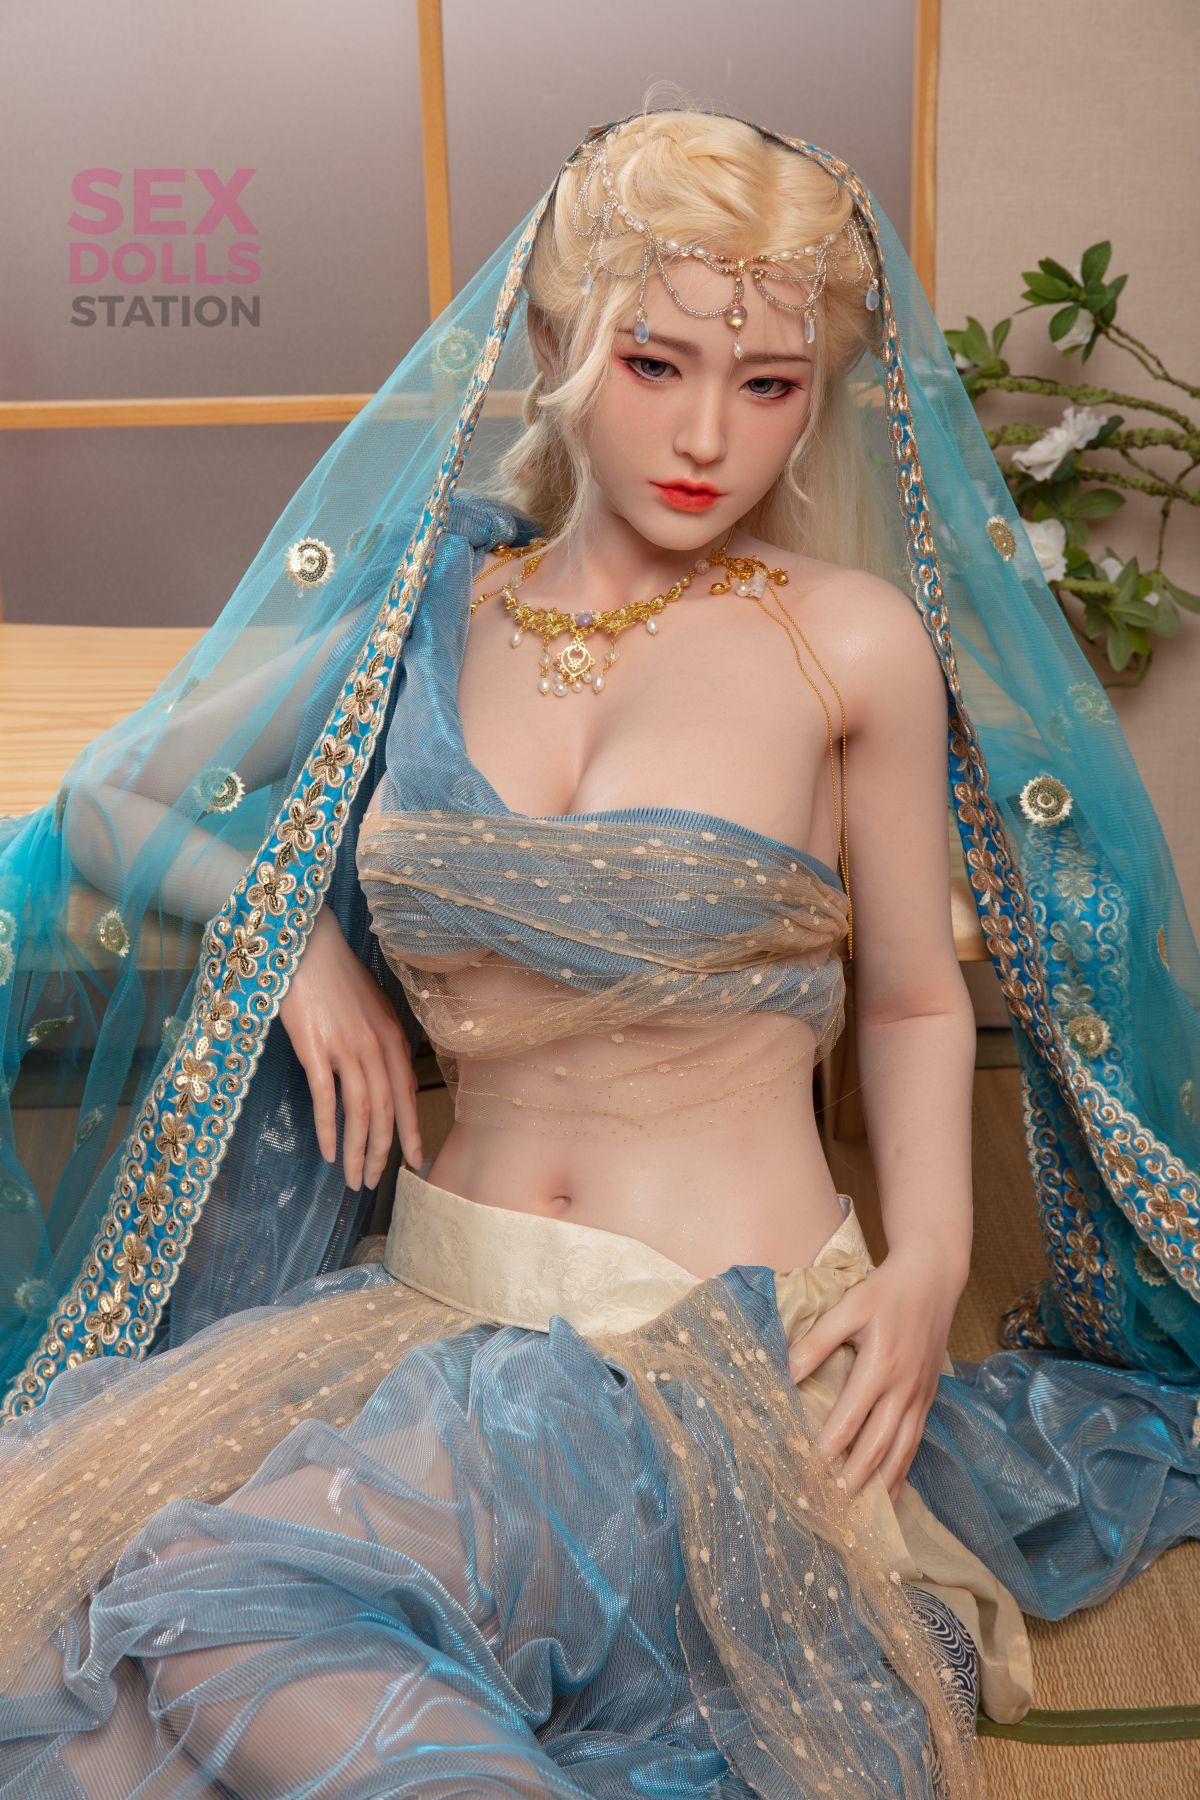 Nomi-160CM Asian Girl TPE Silicone Head Sex Doll In US Stock-SexDolls Station